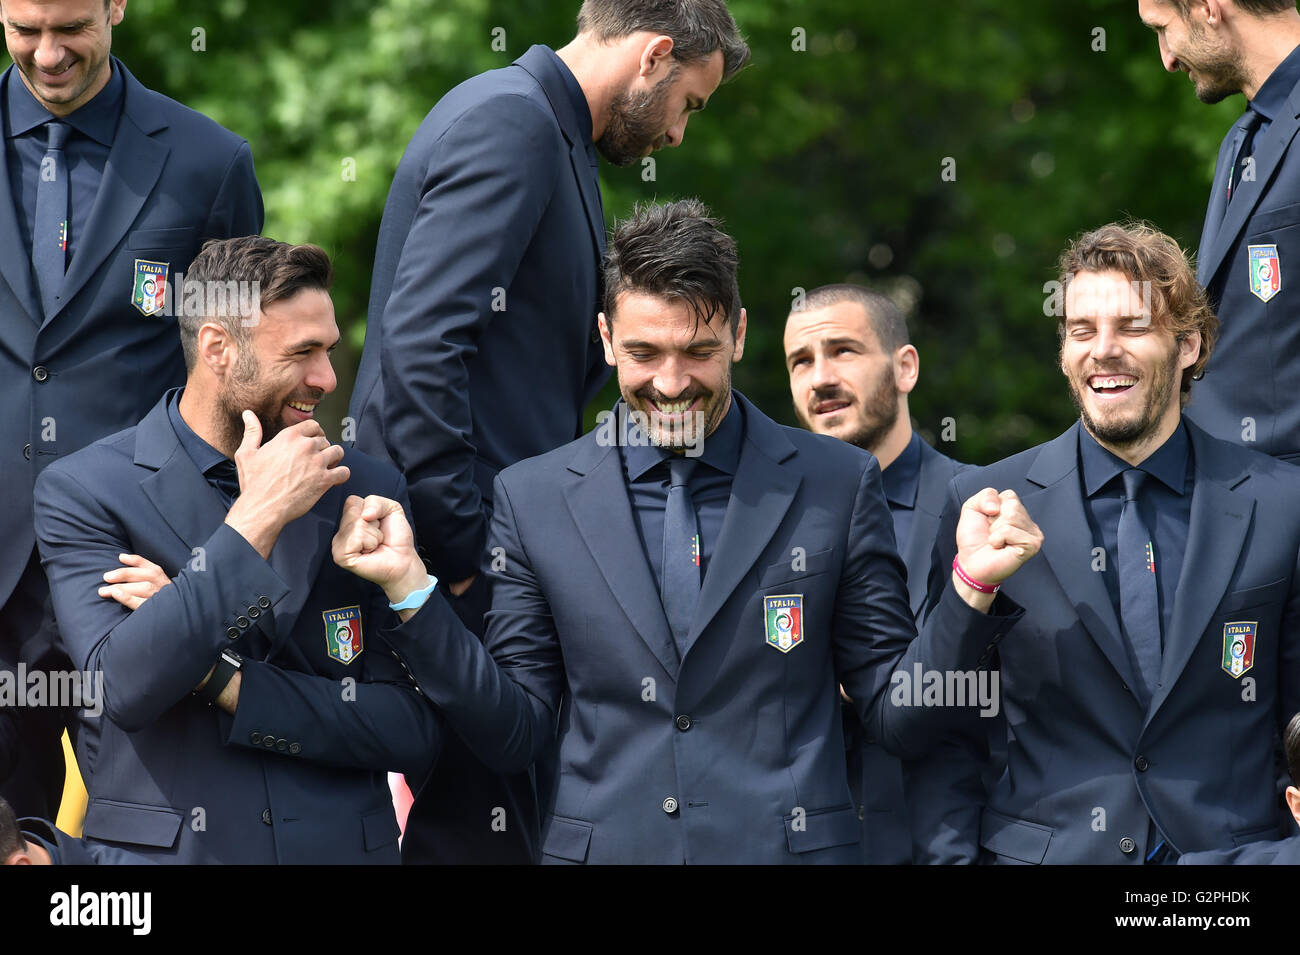 Florence, Italy. 1st June, 2016. Italian national soccer team goalkeeper Gianluigi Buffon (C) reacts during their official team photo shooting at the Coverciano training center, near Florence, Italy, June 1, 2016. © Alberto Lingria/Xinhua/Alamy Live News Stock Photo